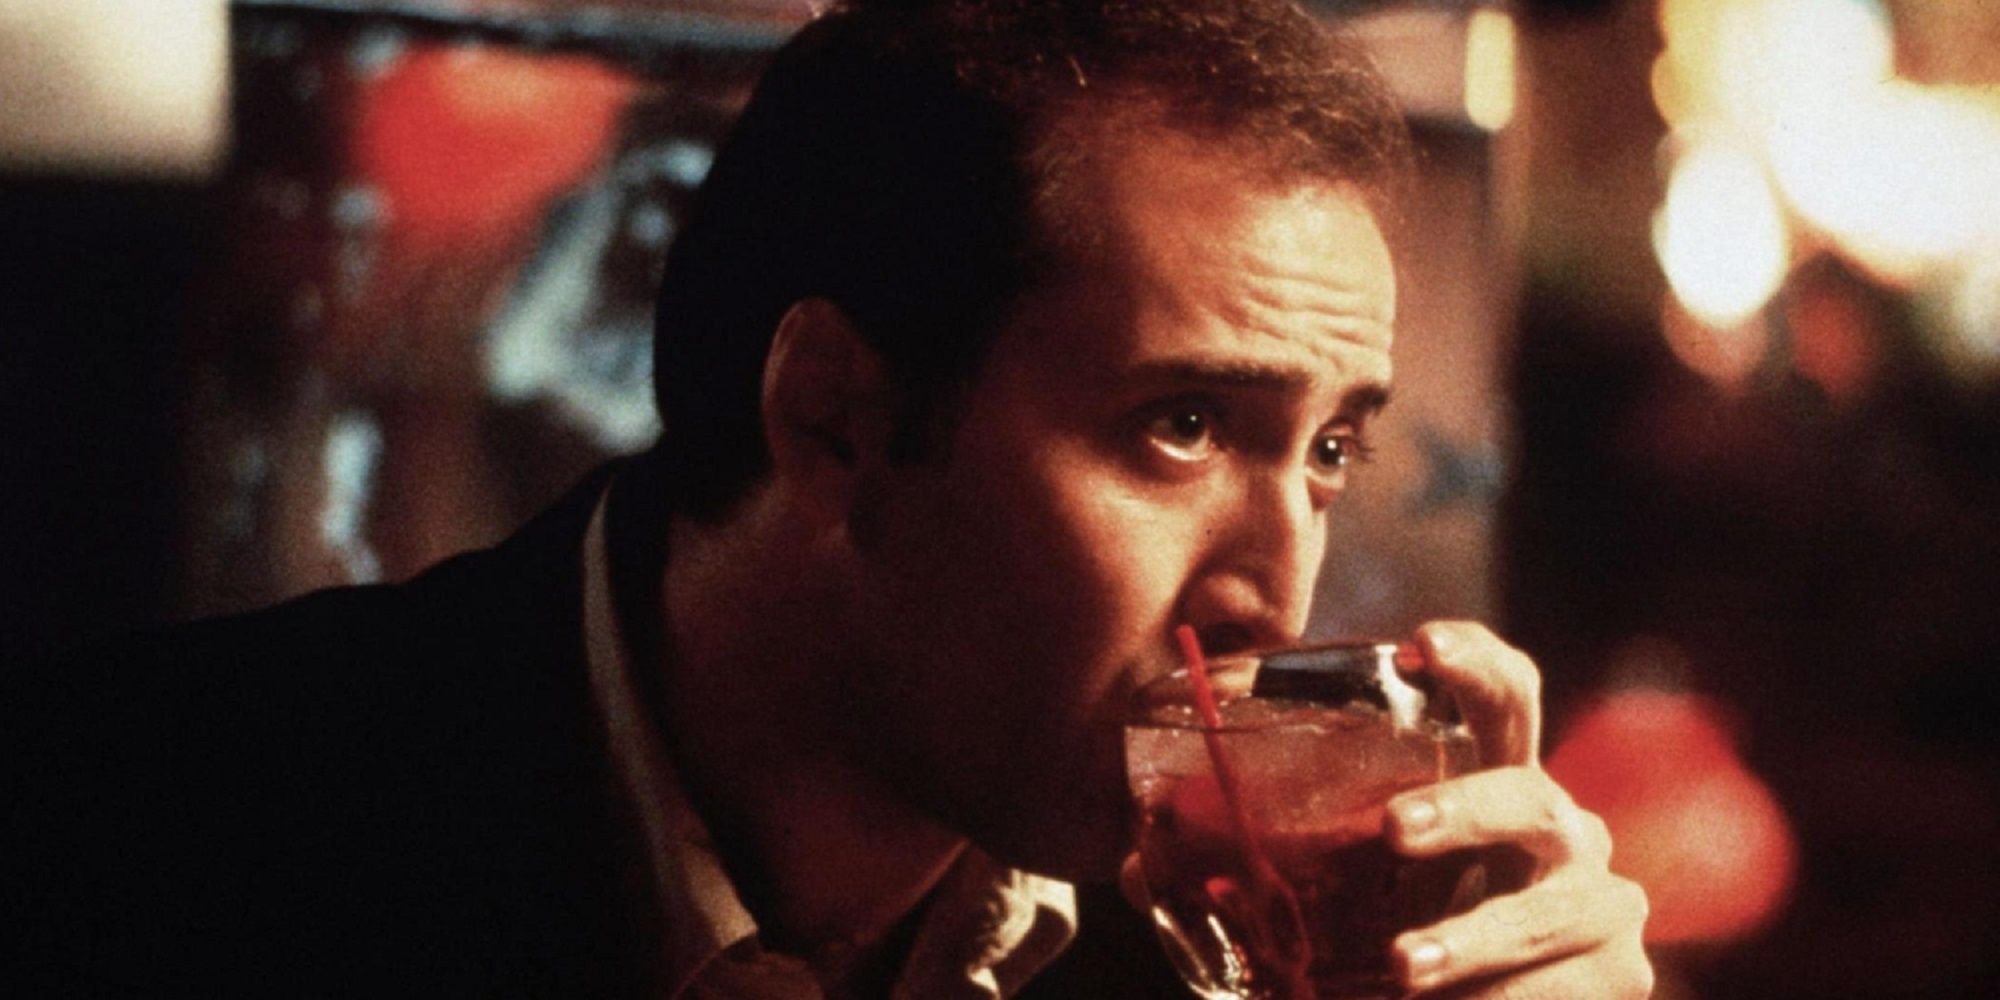 Nicolas Cage drinking a cocktail in 'Leaving Las Vegas.'